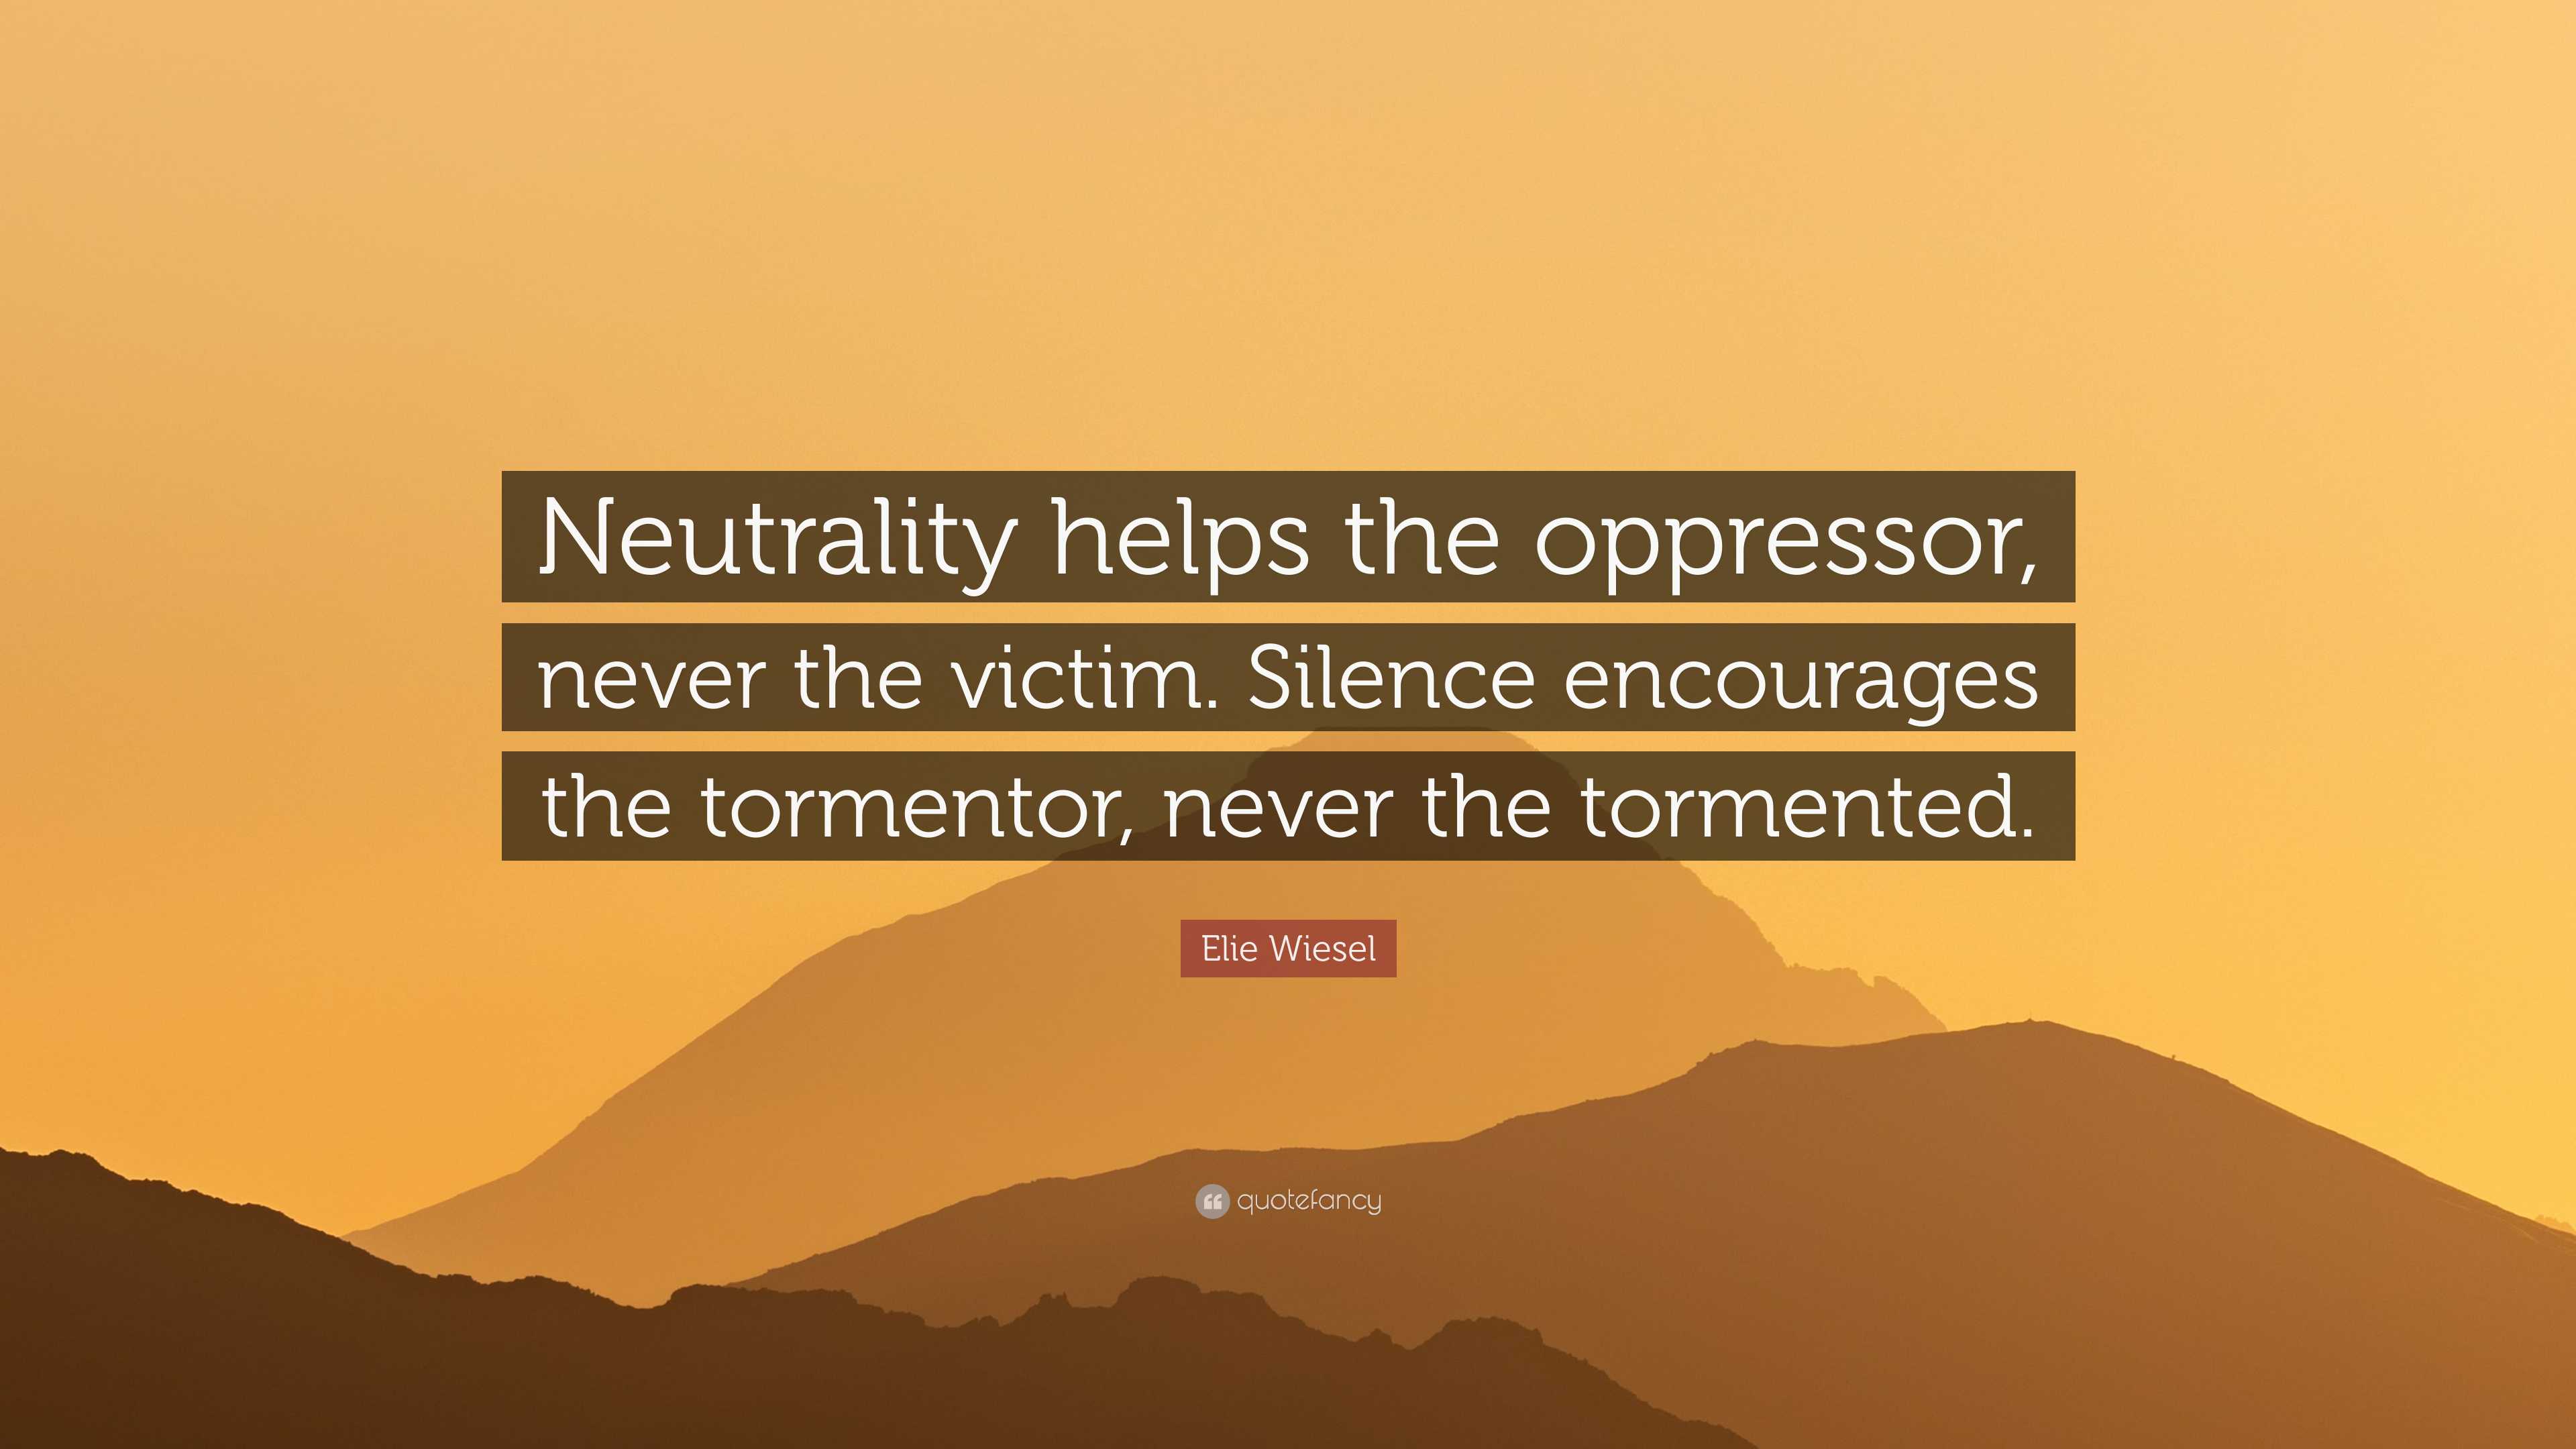 Elie Wiesel Quote: “Neutrality helps the oppressor, never the victim ...